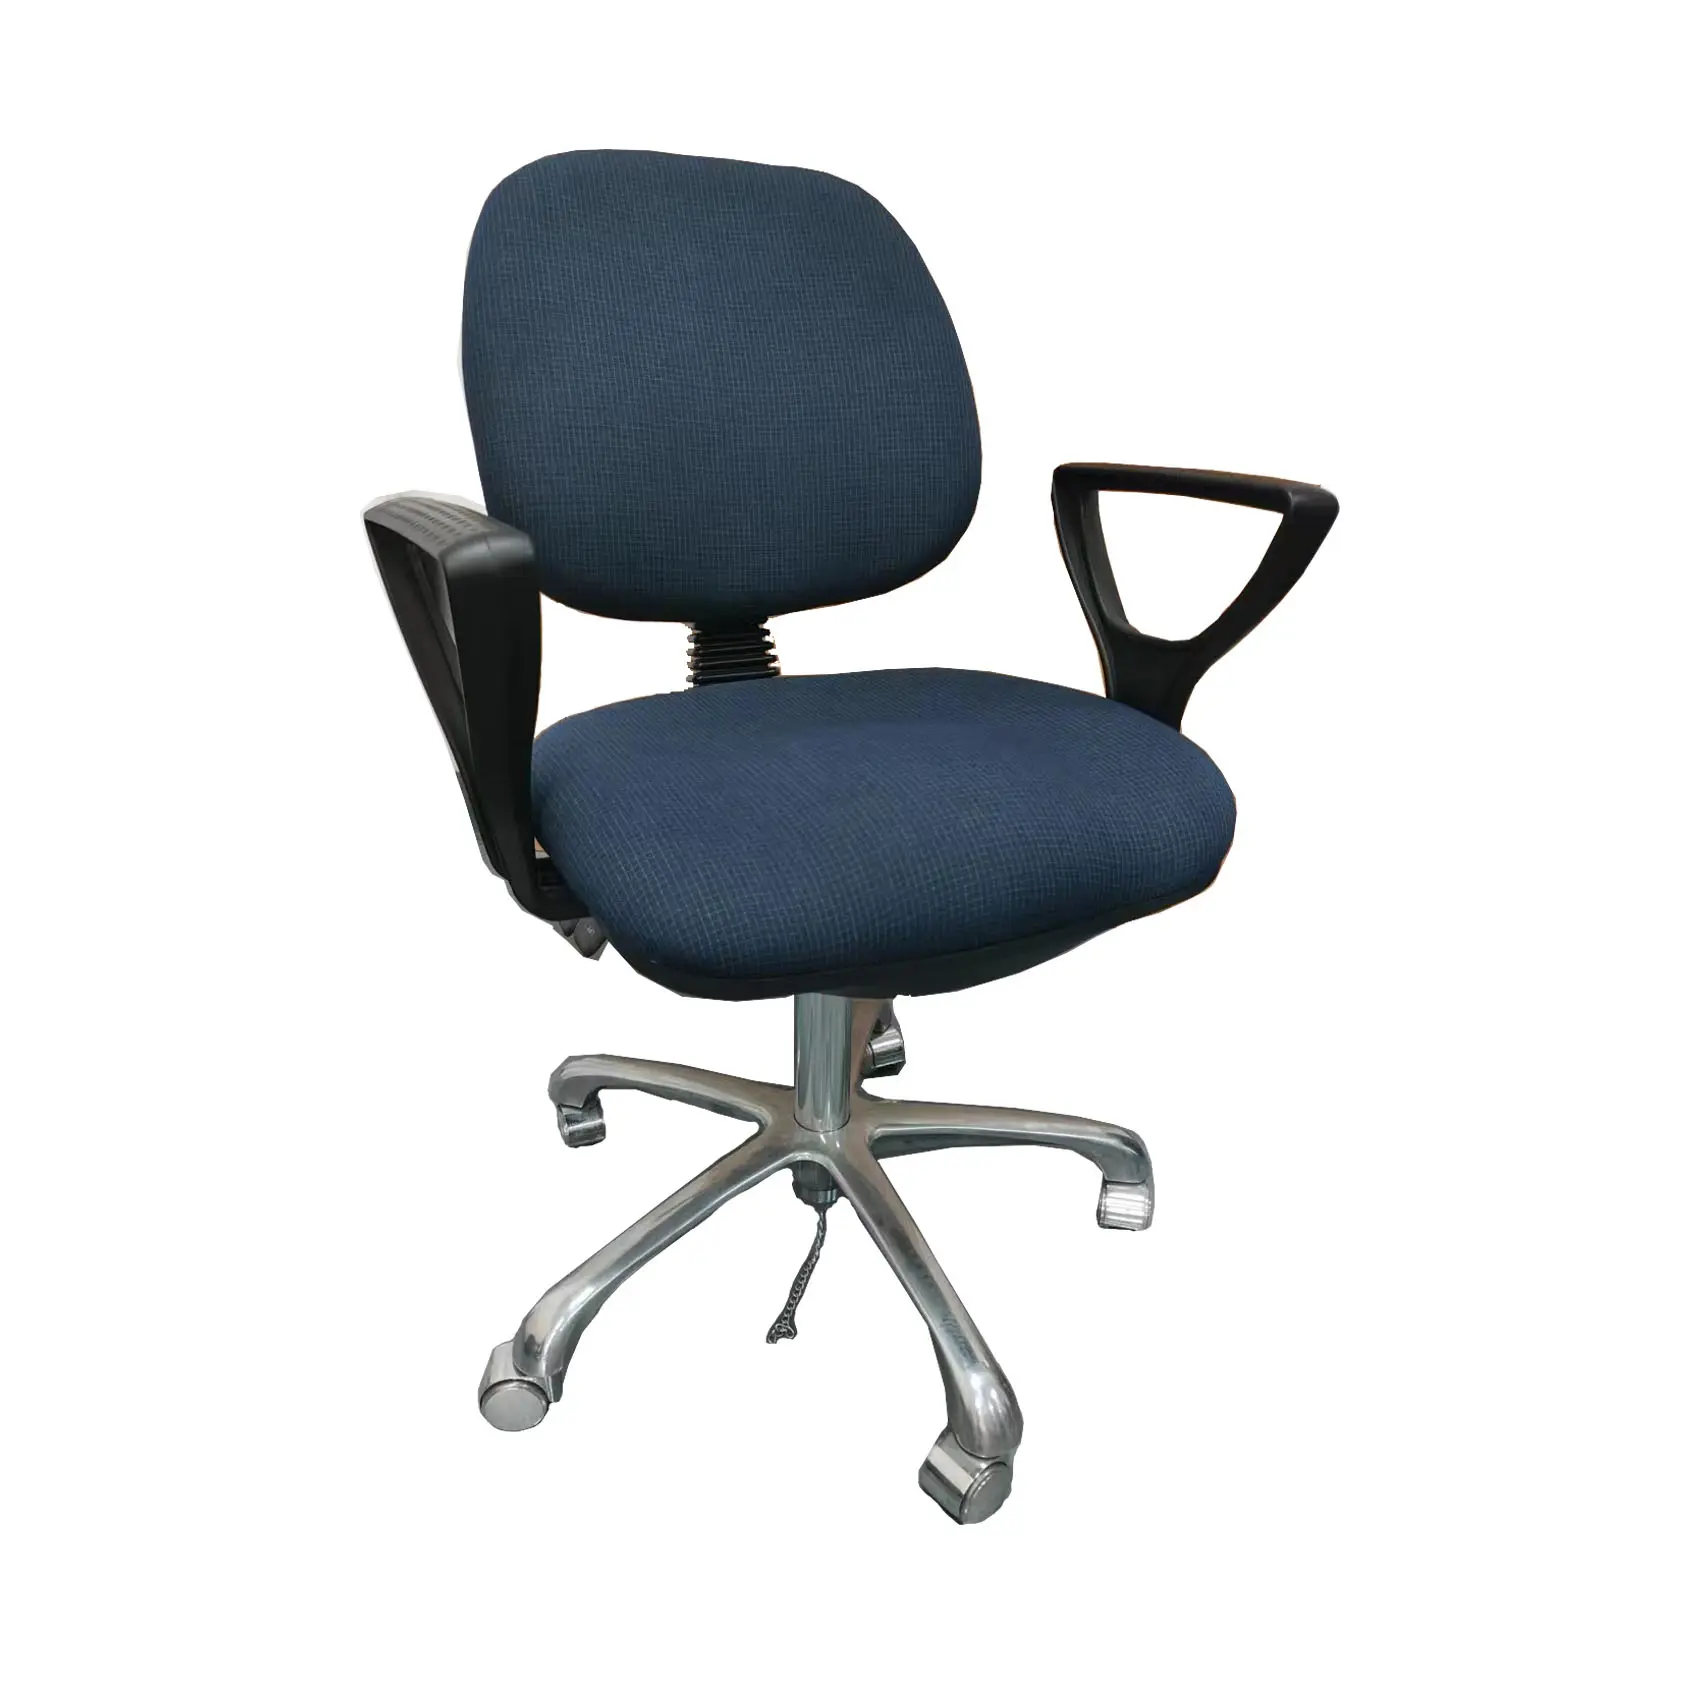 High quality Grey esd work fabric chair with arm rest Antistatic Fabric Chair lab